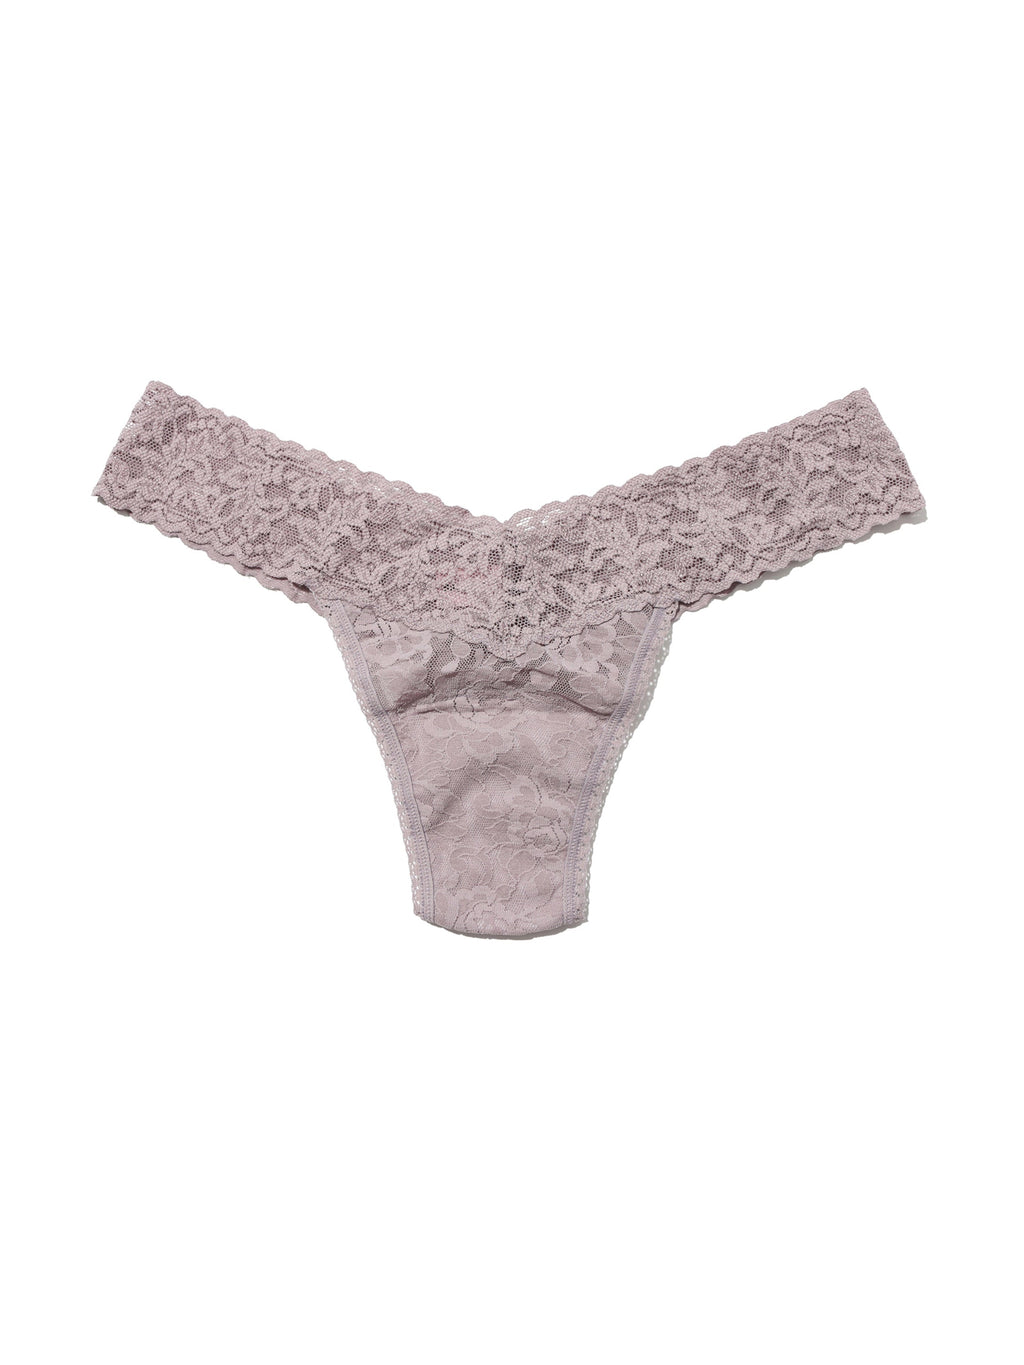 Hanky Panky Signature Lace Low Rise Thong, Rolled - Monkee's of Draper